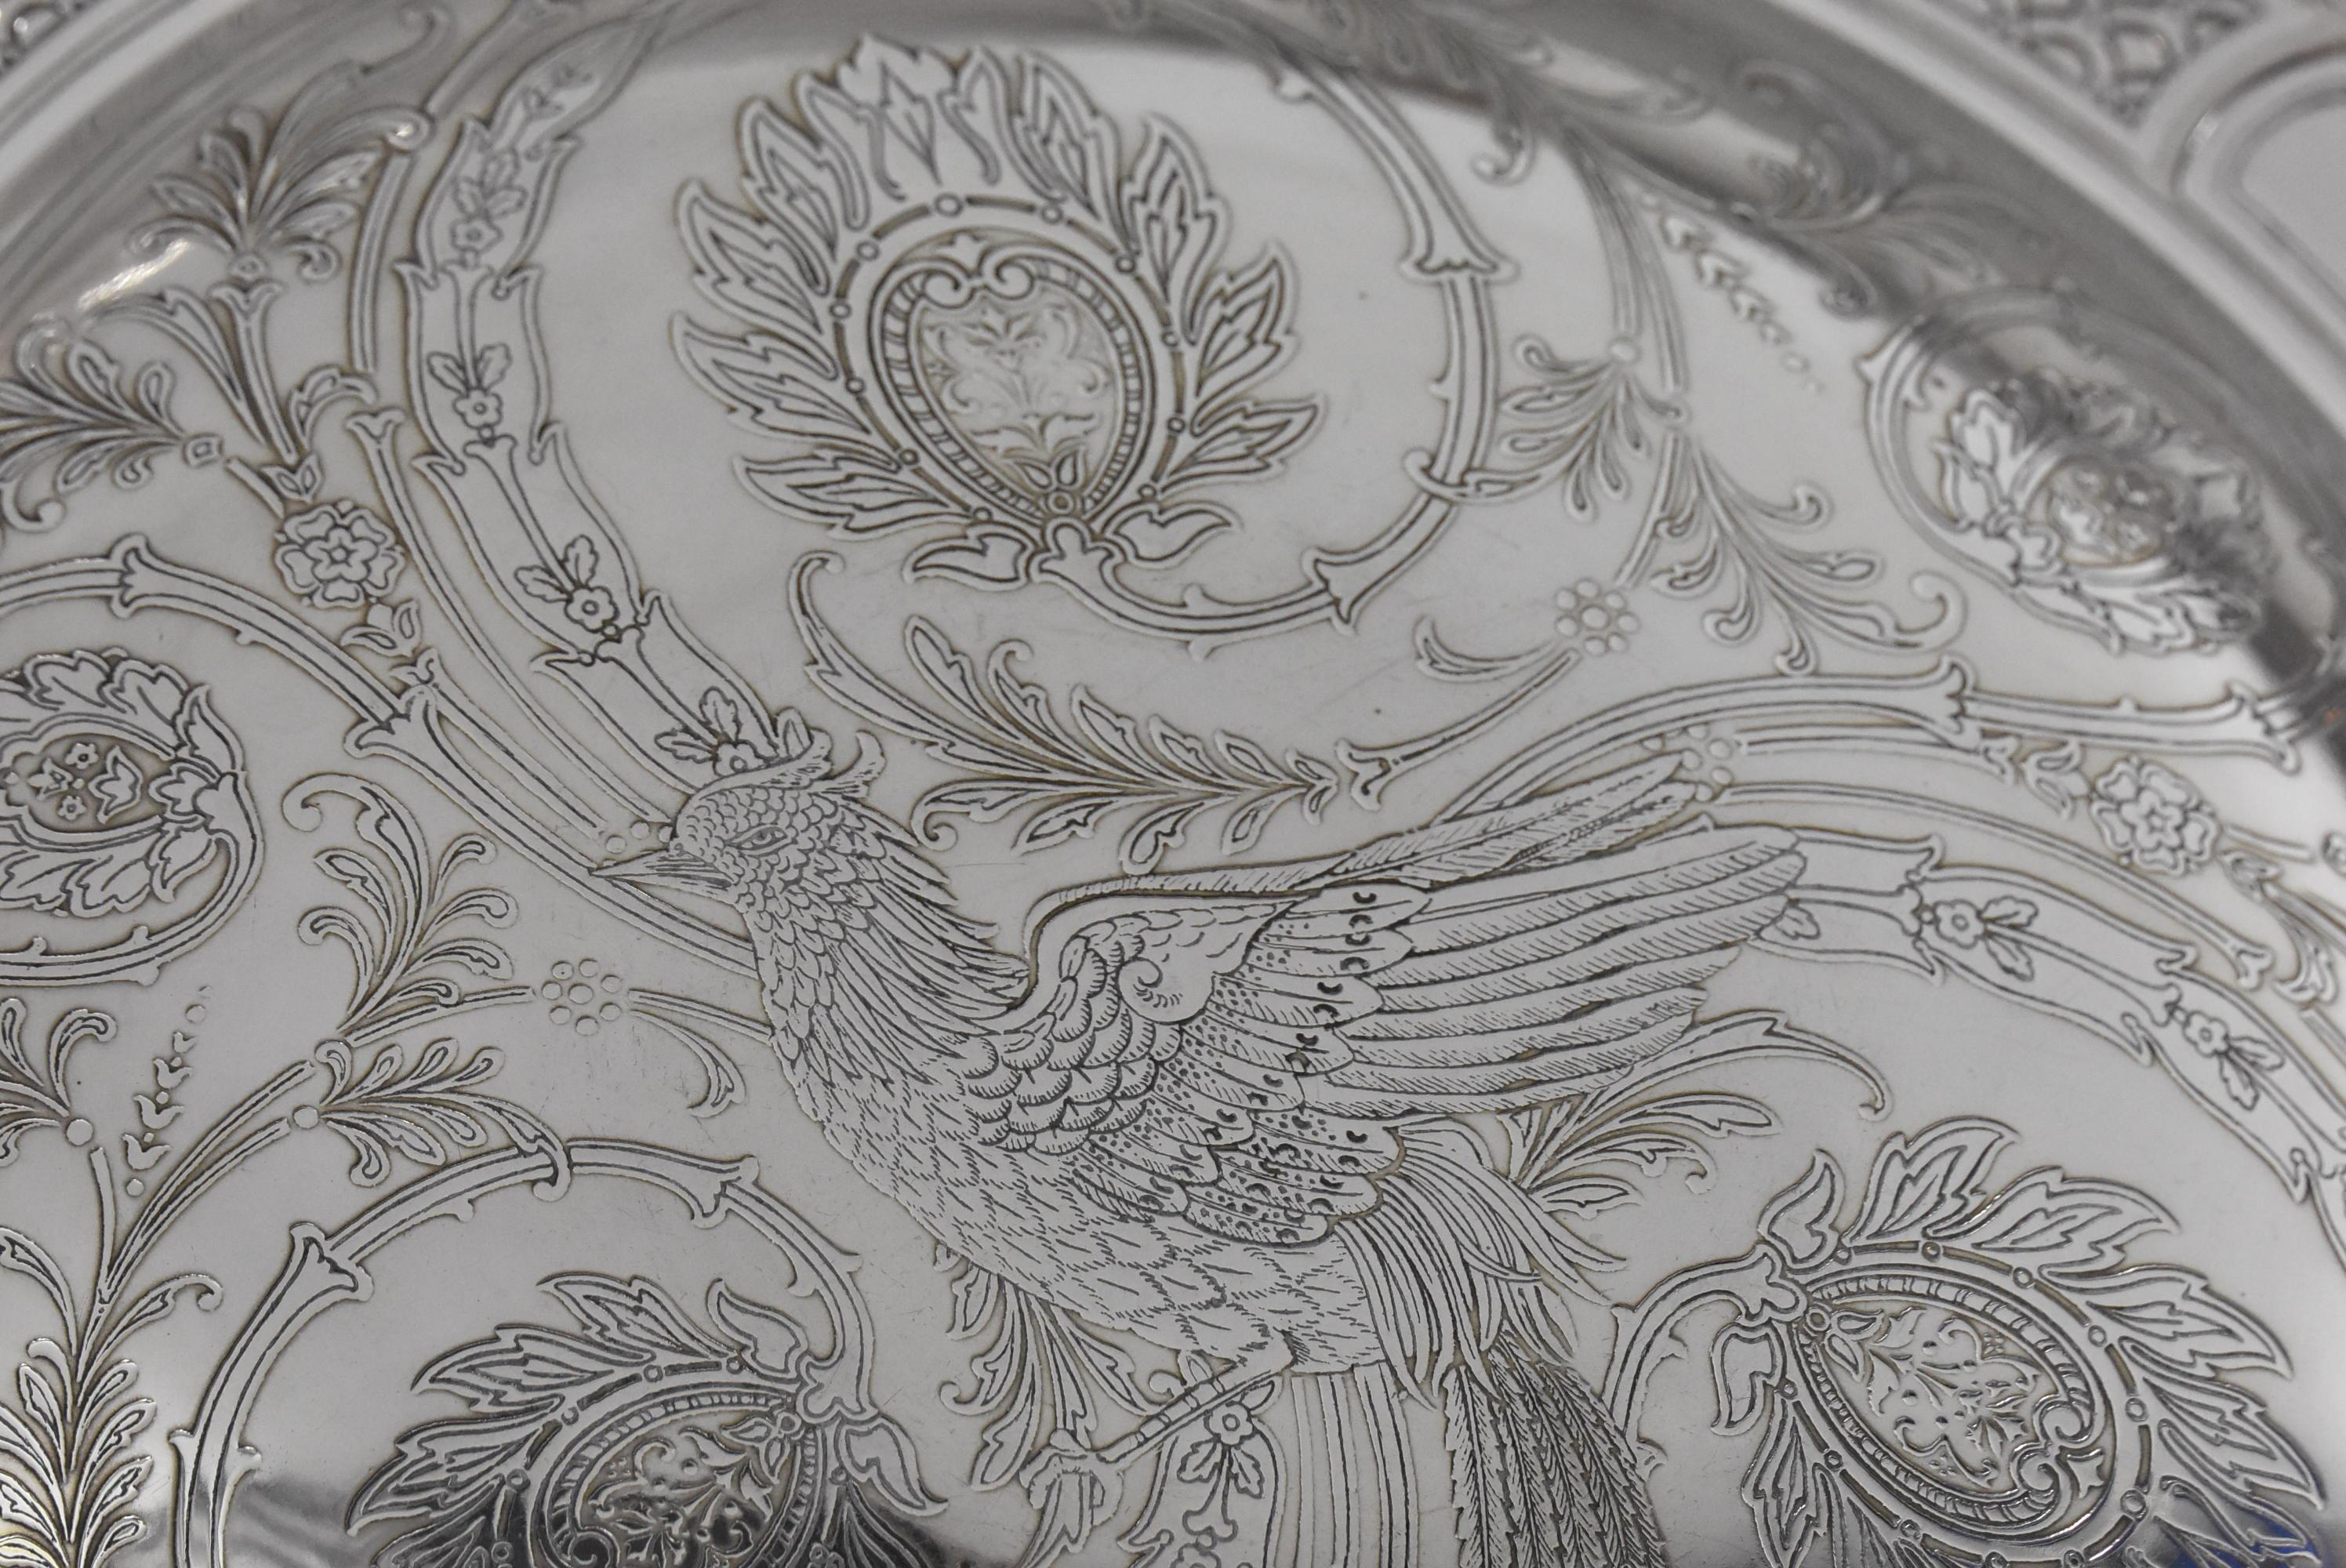 Aesthetic circa 1914 Tiffany & Co. sterling silver bowl with molded rim and foot. Acid etched interior patterned with bird and floral designs. Rim has fish tail details. Marked on the bottom 18696 A 925-1000 6499. No dings. Scratches on the bottom